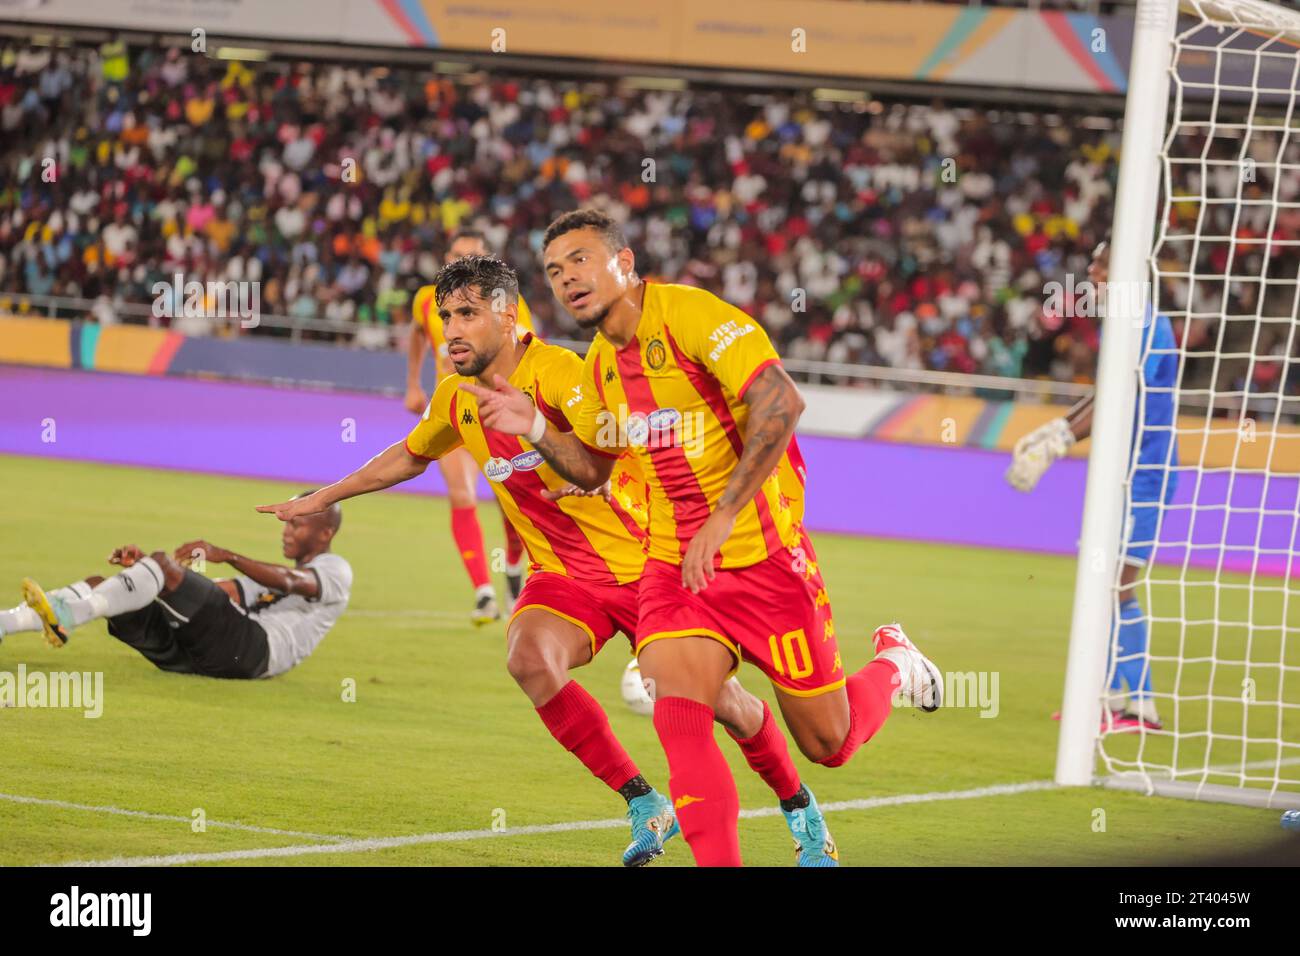 DAR ES SALAAM, TUNISIA – OCTOBER 22:   Esperance celebration during the African Football League match between Tp Mazembe of Congo DR and Esperance ST Stock Photo